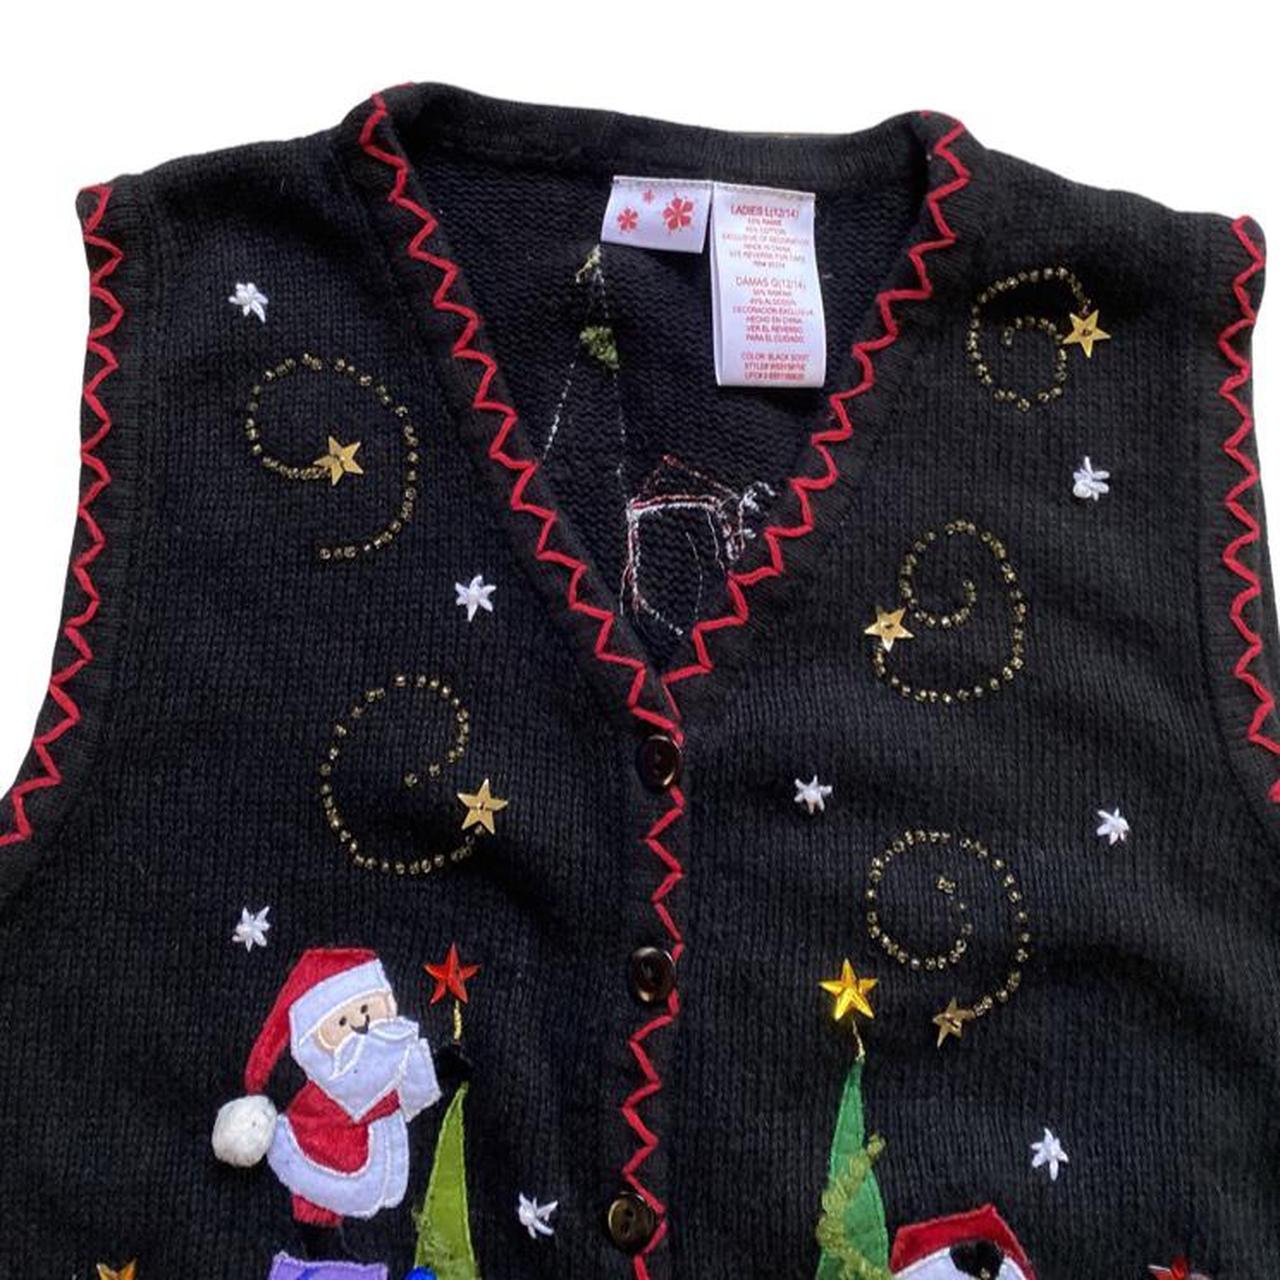 Product Image 3 - Black vintage Christmas knitted sweater